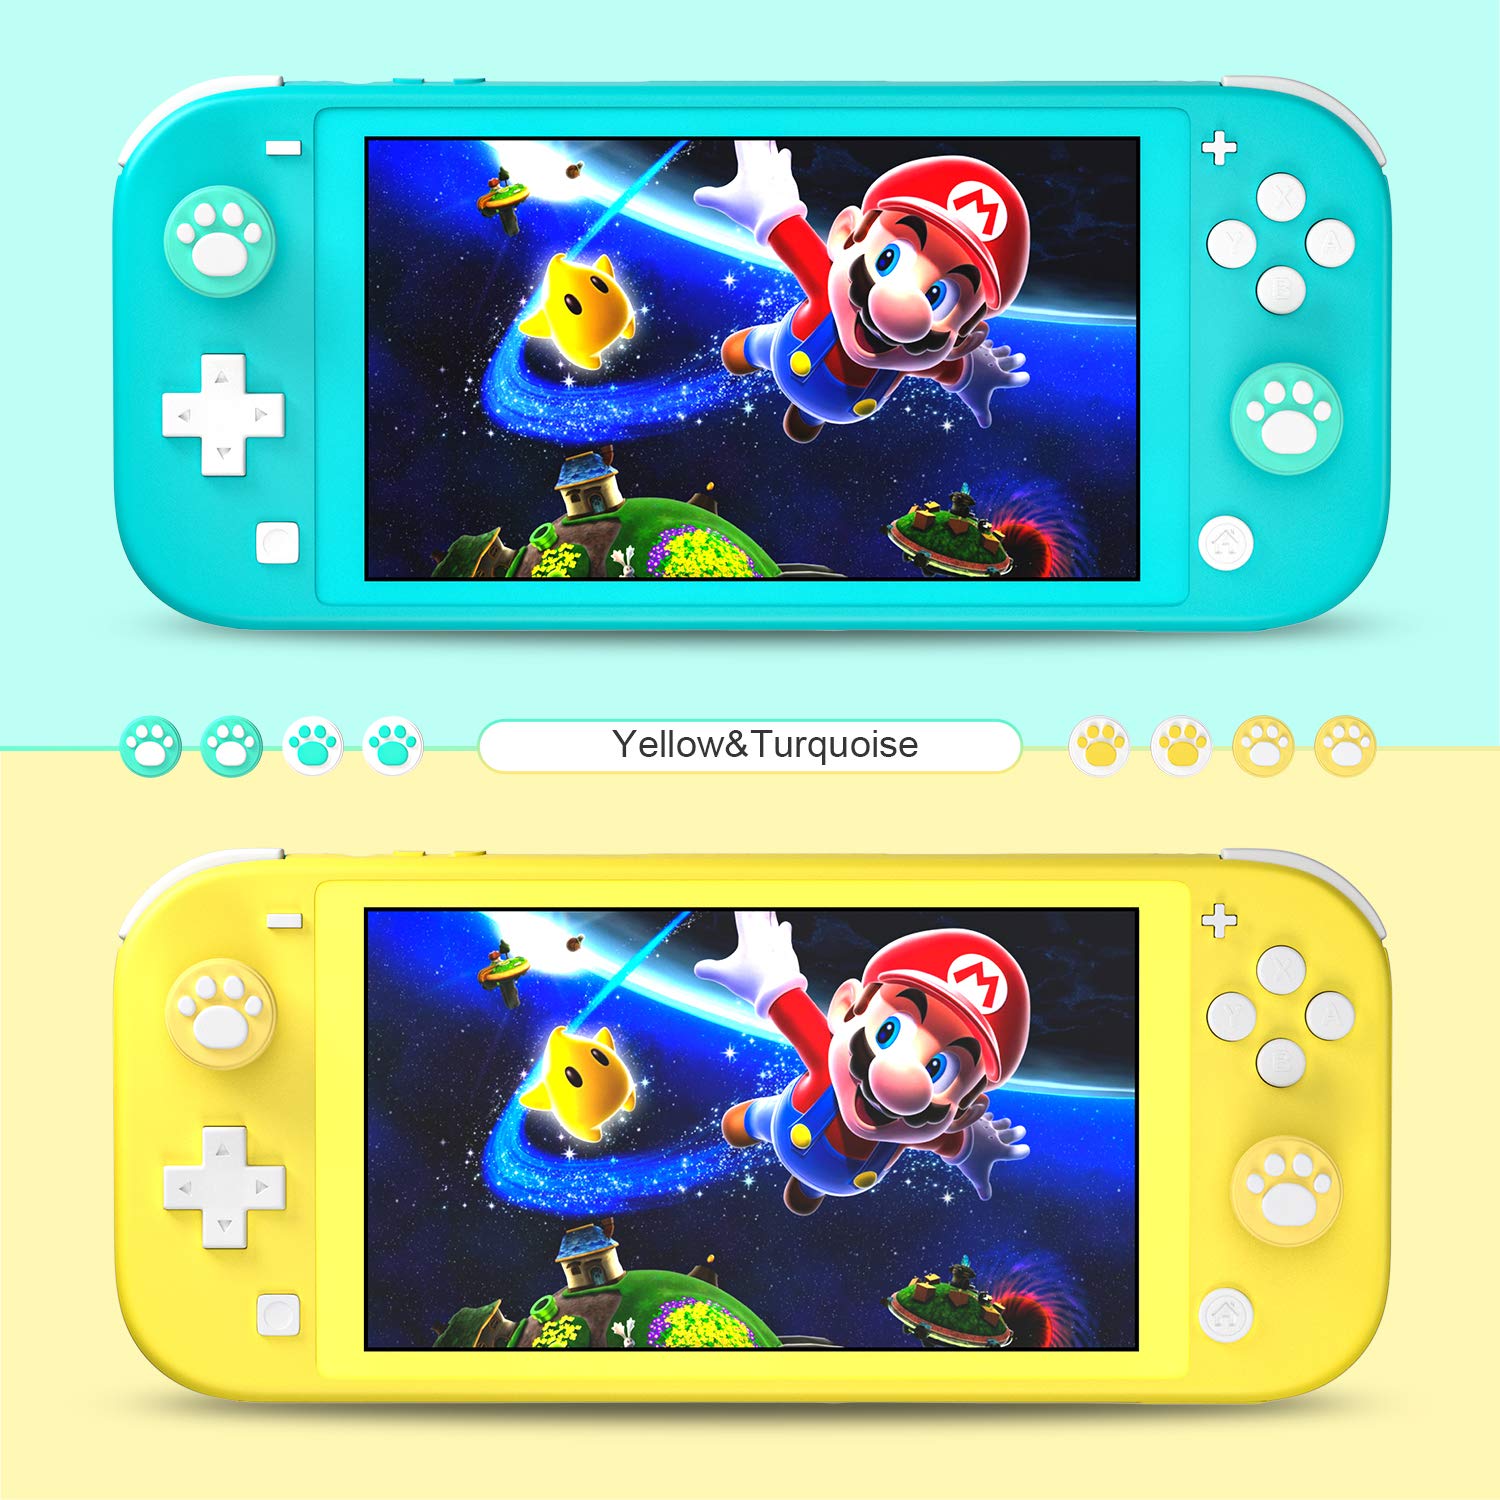 Daydayup Clear Case Compatible with Nintendo Switch Lite Protective, with 2-Pack Switch Lite Tempered Screen Protector and 6 Pcs Cult Thumb Grips,HD Clear